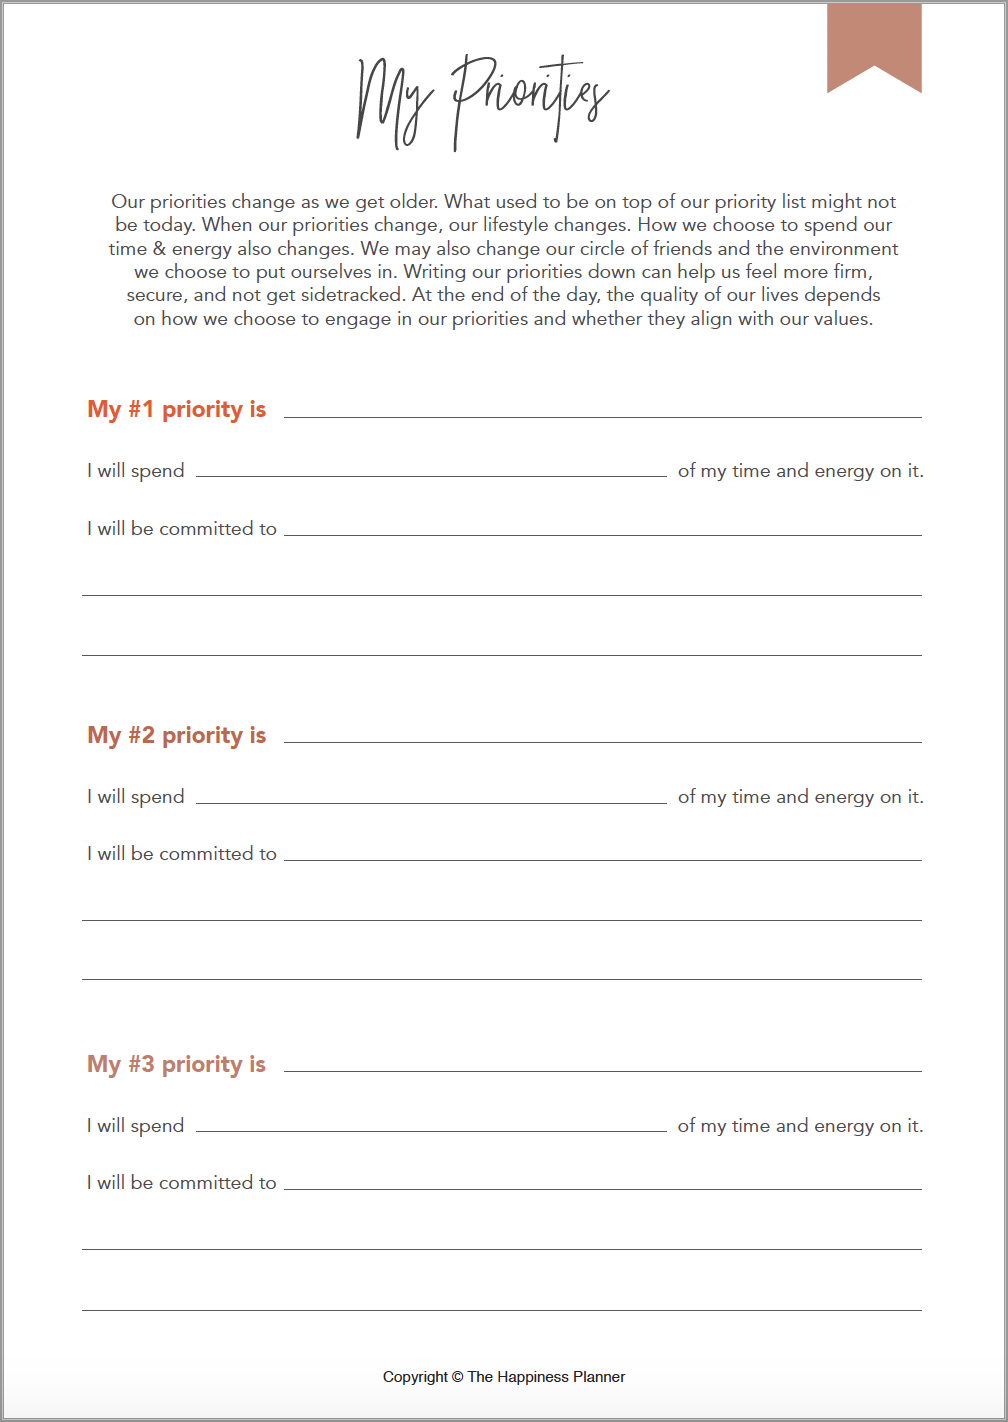 Printables: #Goals I - The Happiness Planner®